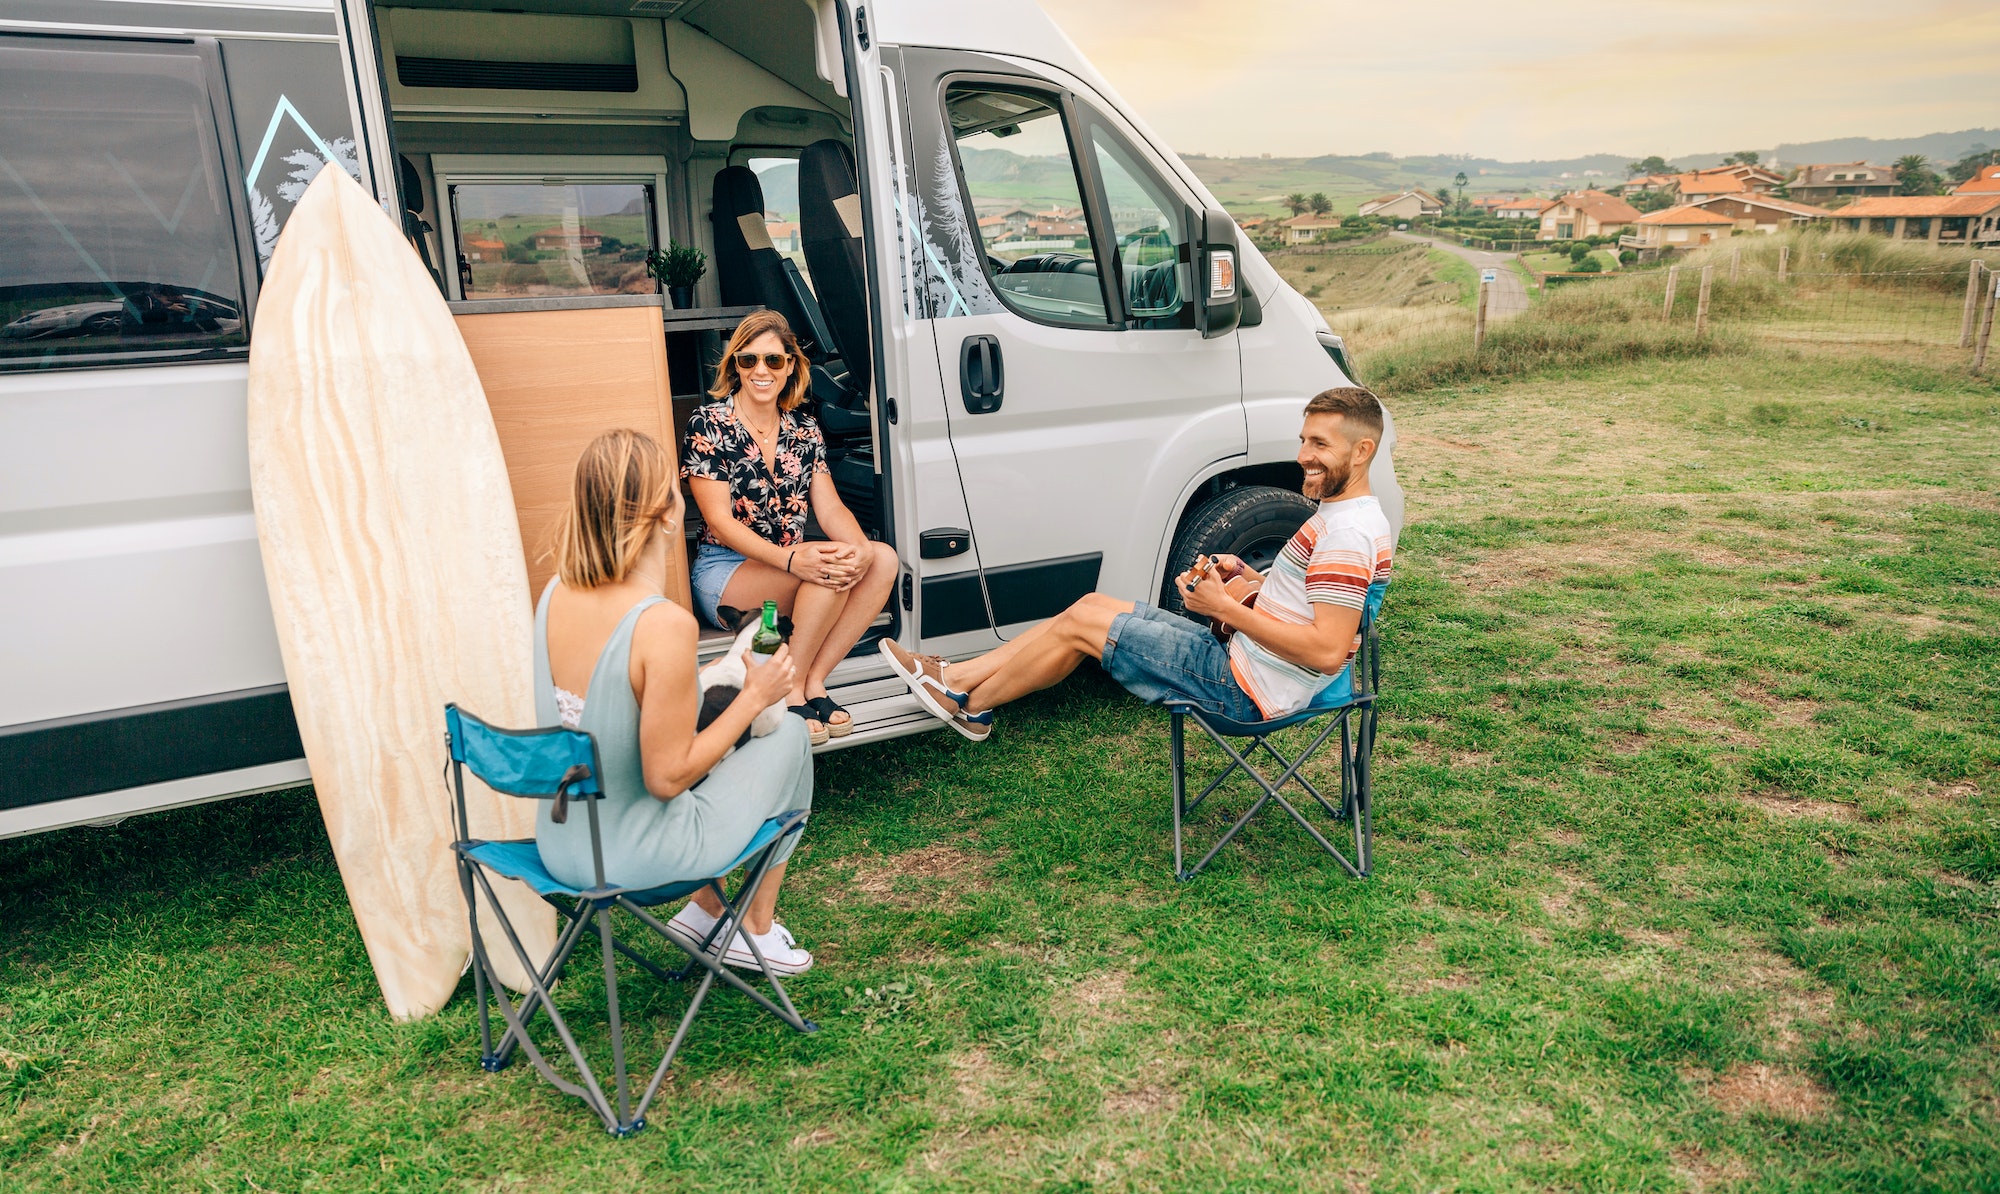 Renting a Camper Van: The Perfect Way to Travel the Country